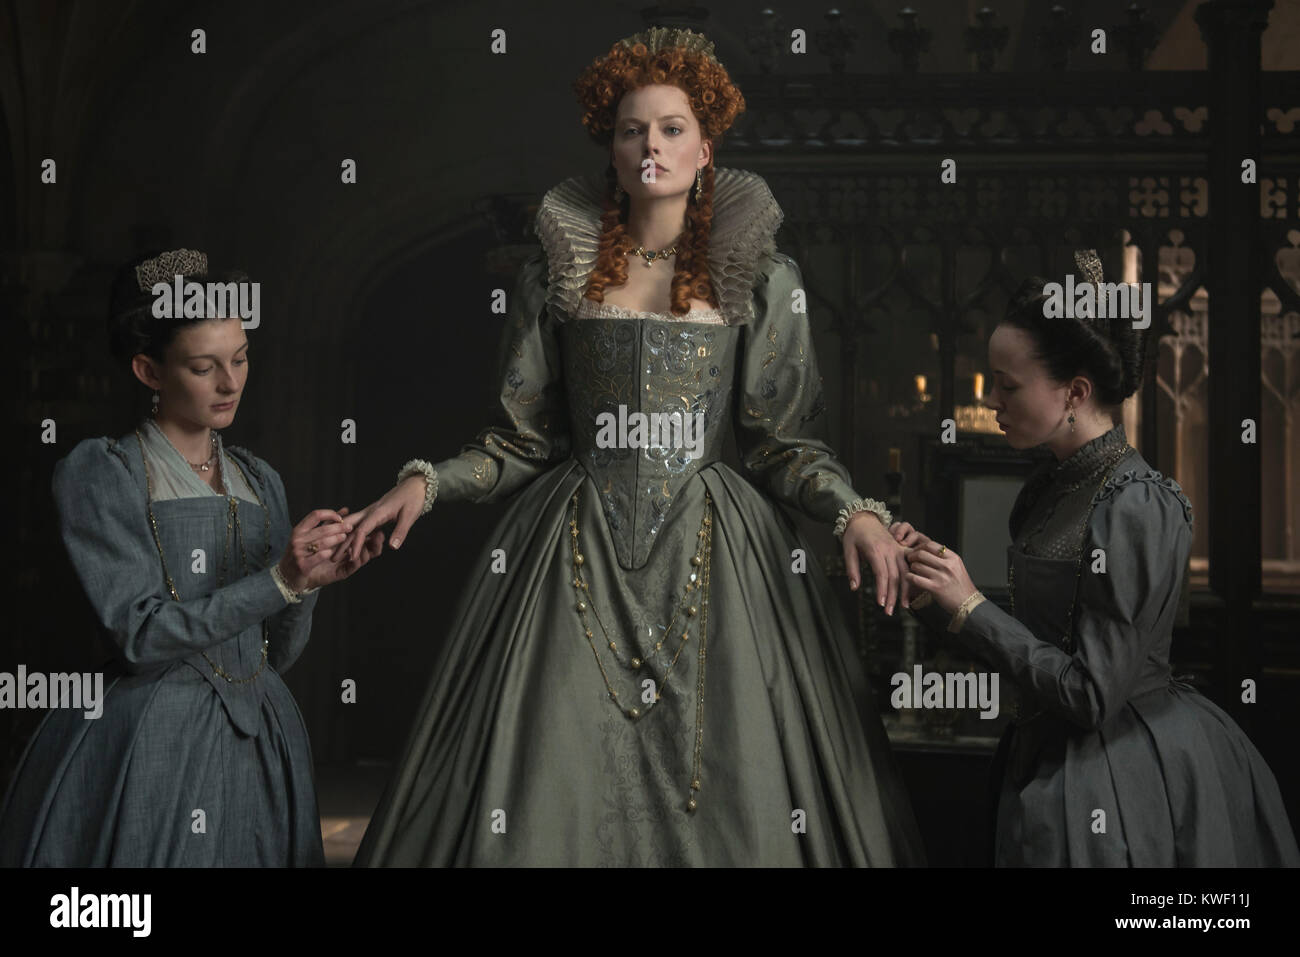 RELEASE DATE: November 2, 2018 TITLE: Mary Queen Of Scots STUDIO: Focus Features DIRECTOR: Josie Rourke PLOT: Mary Stuart's attempt to overthrow her cousin Elizabeth I, Queen of England, finds her condemned to years of imprisonment before facing execution. STARRING: GRACE MOLONY stars as Dorothy Stafford, MARGOT ROBBIE stars as Queen Elizabeth I and GEORGIA BURNELL as Kate Carey. (Credit Image: © New Line Cinema/Entertainment Pictures) Stock Photo